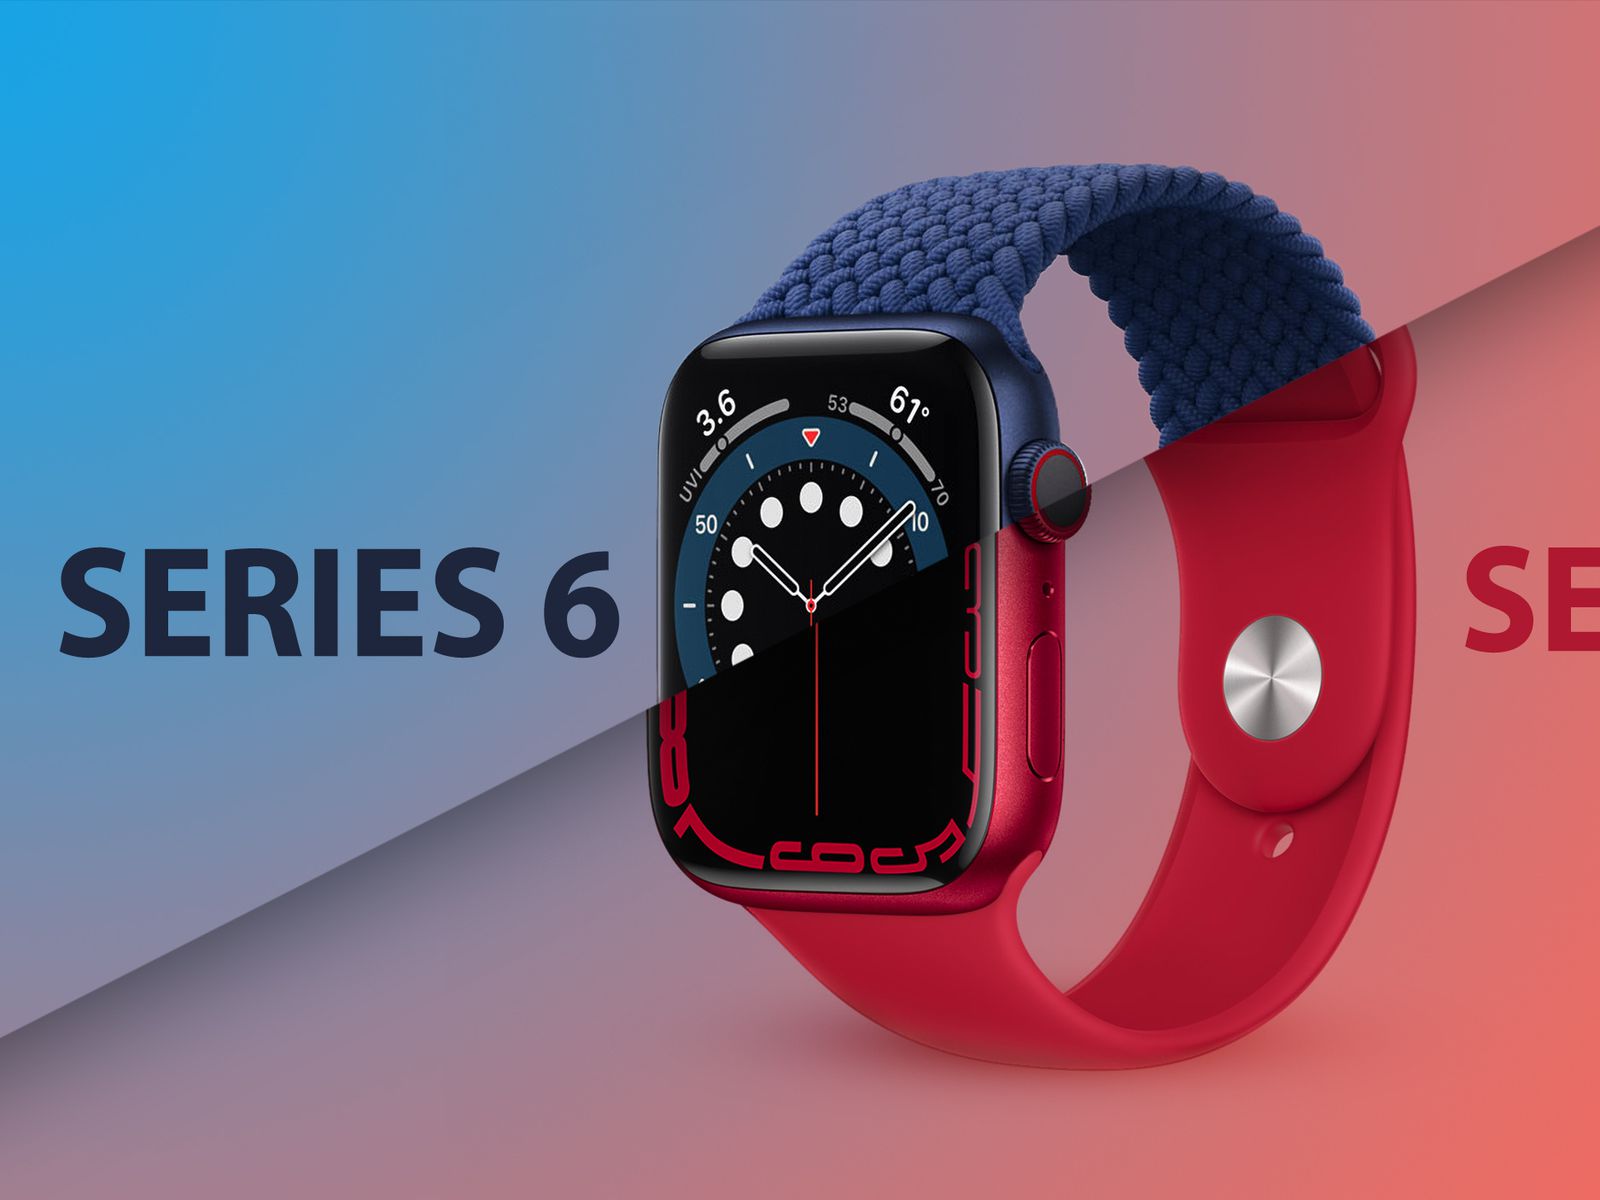 Apple Watch Series 7 [GPS 41mm] Smart Watch w/ (Product) RED Aluminum Case  with (Product) RED Sport Band. Fitness Tracker, Blood Oxygen & ECG Apps